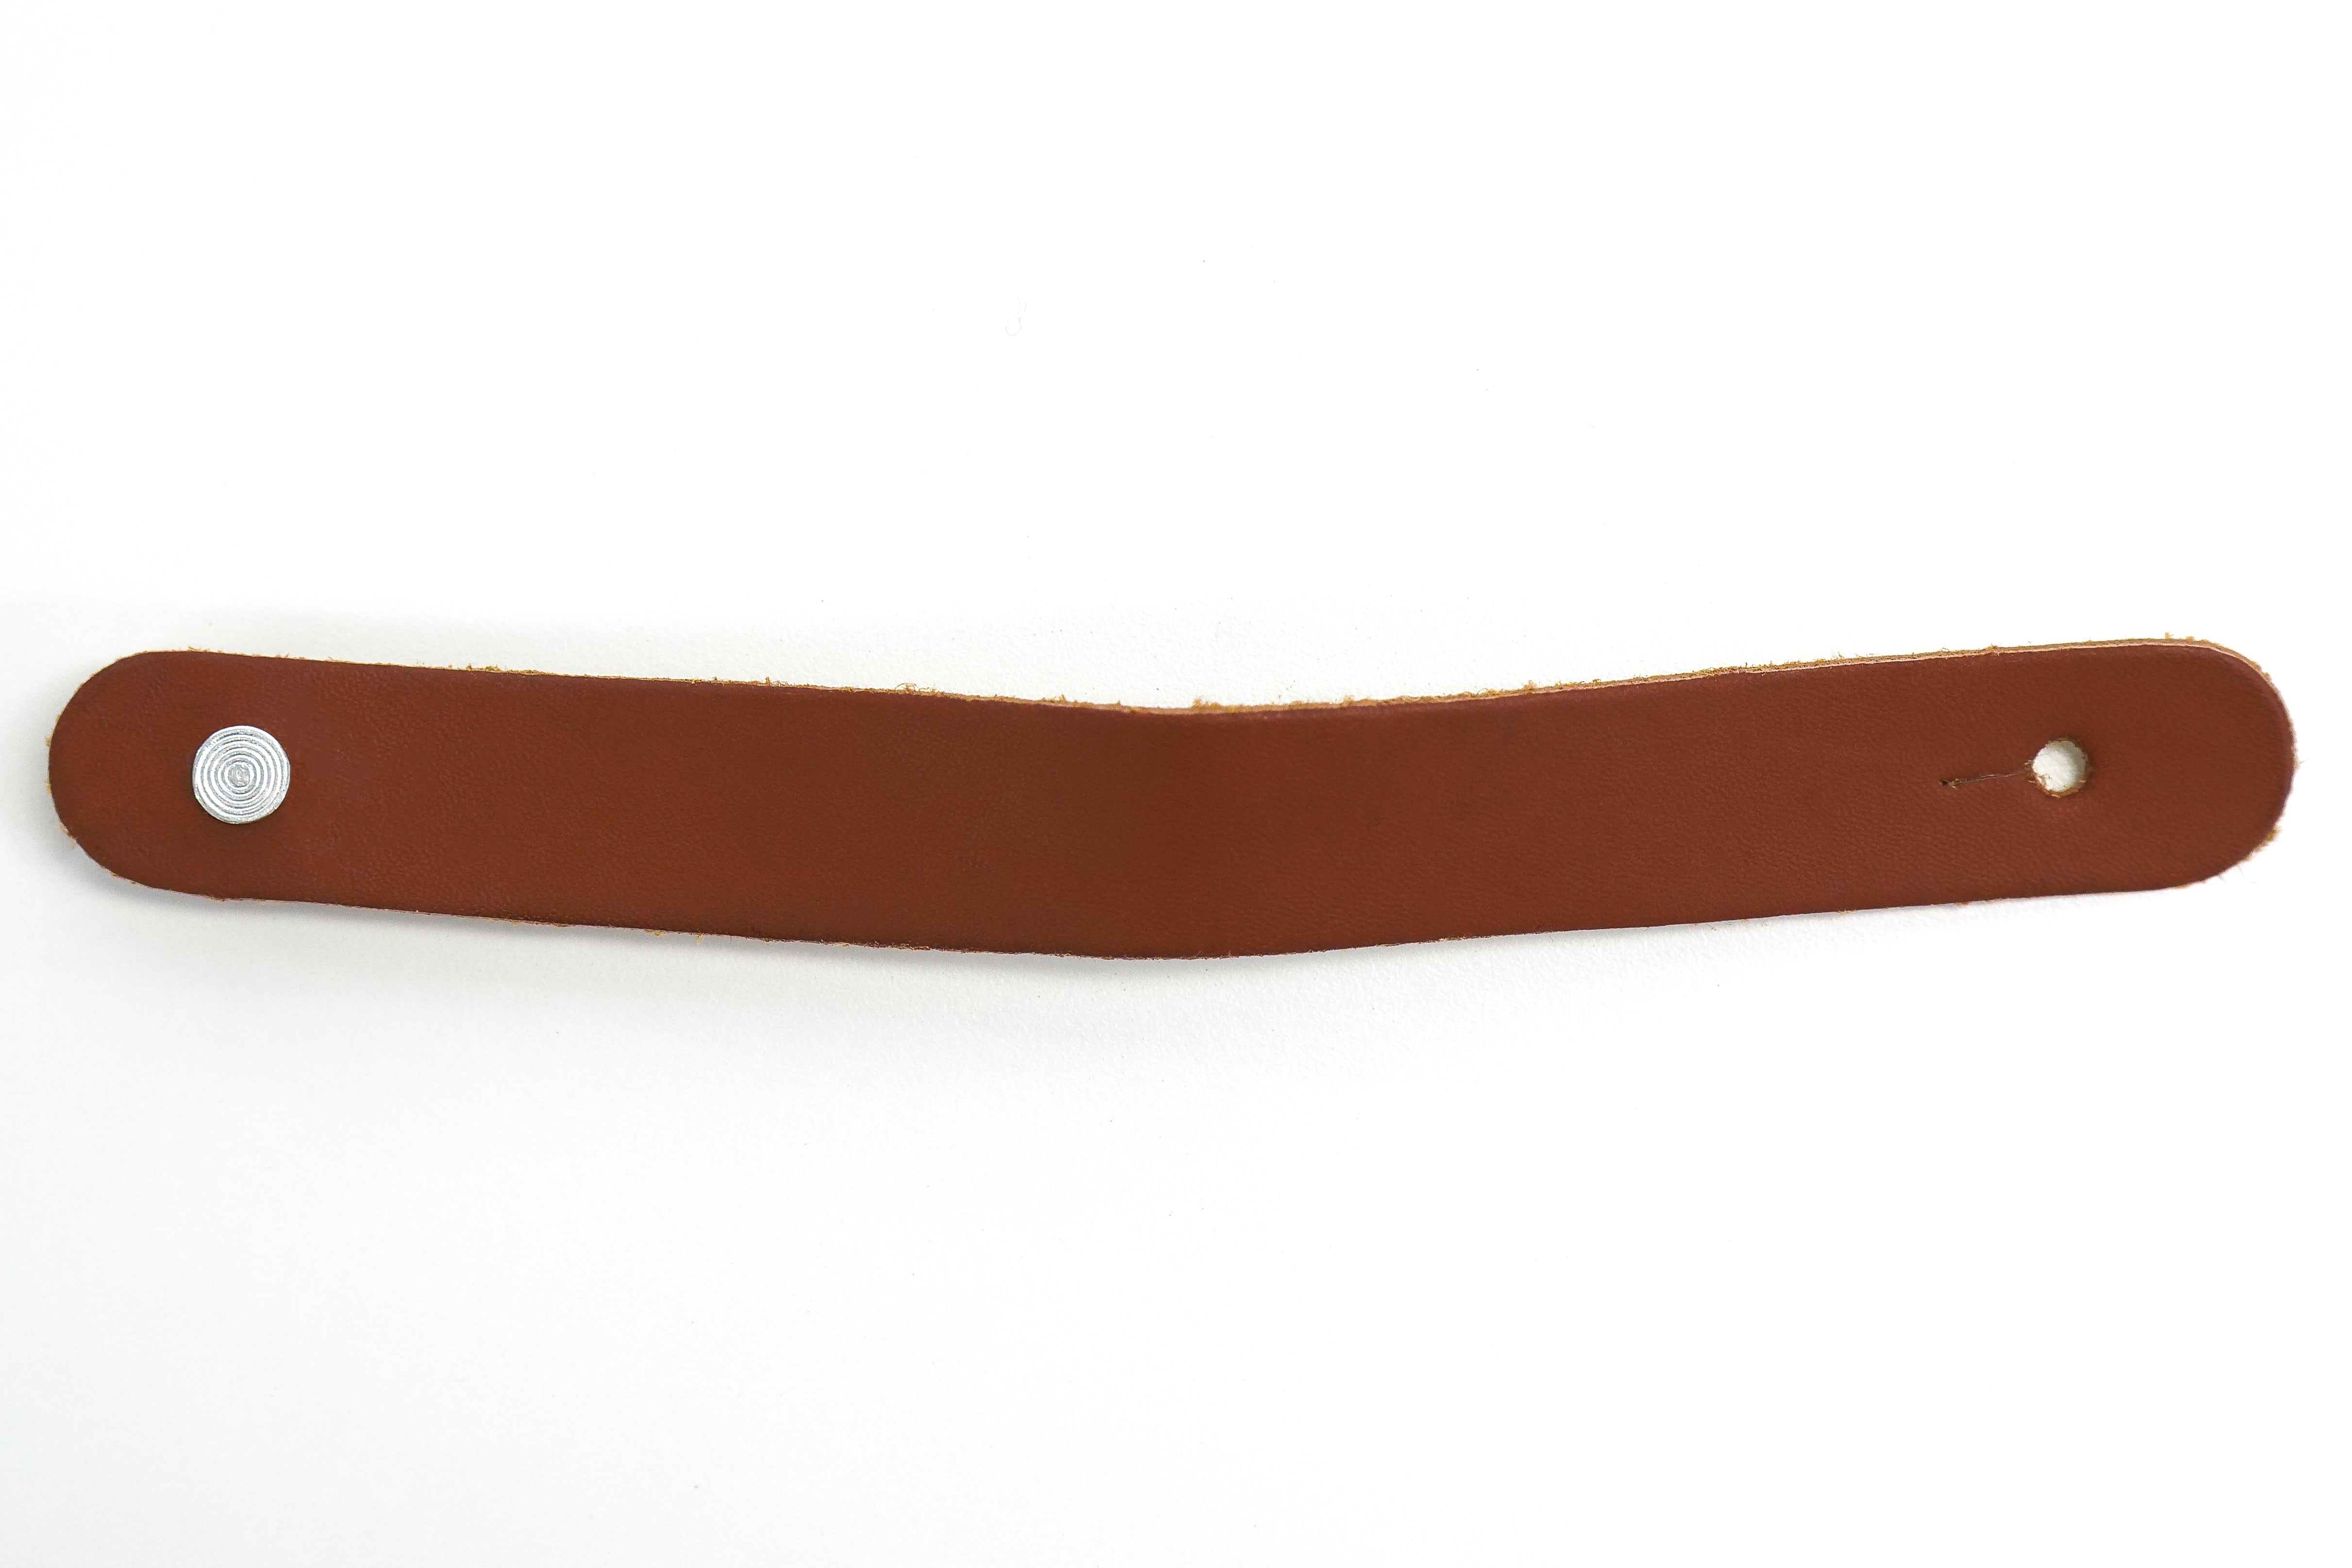 Headstock Strap Adaptor For Guitar and Ukulele - BROWN LEATHER